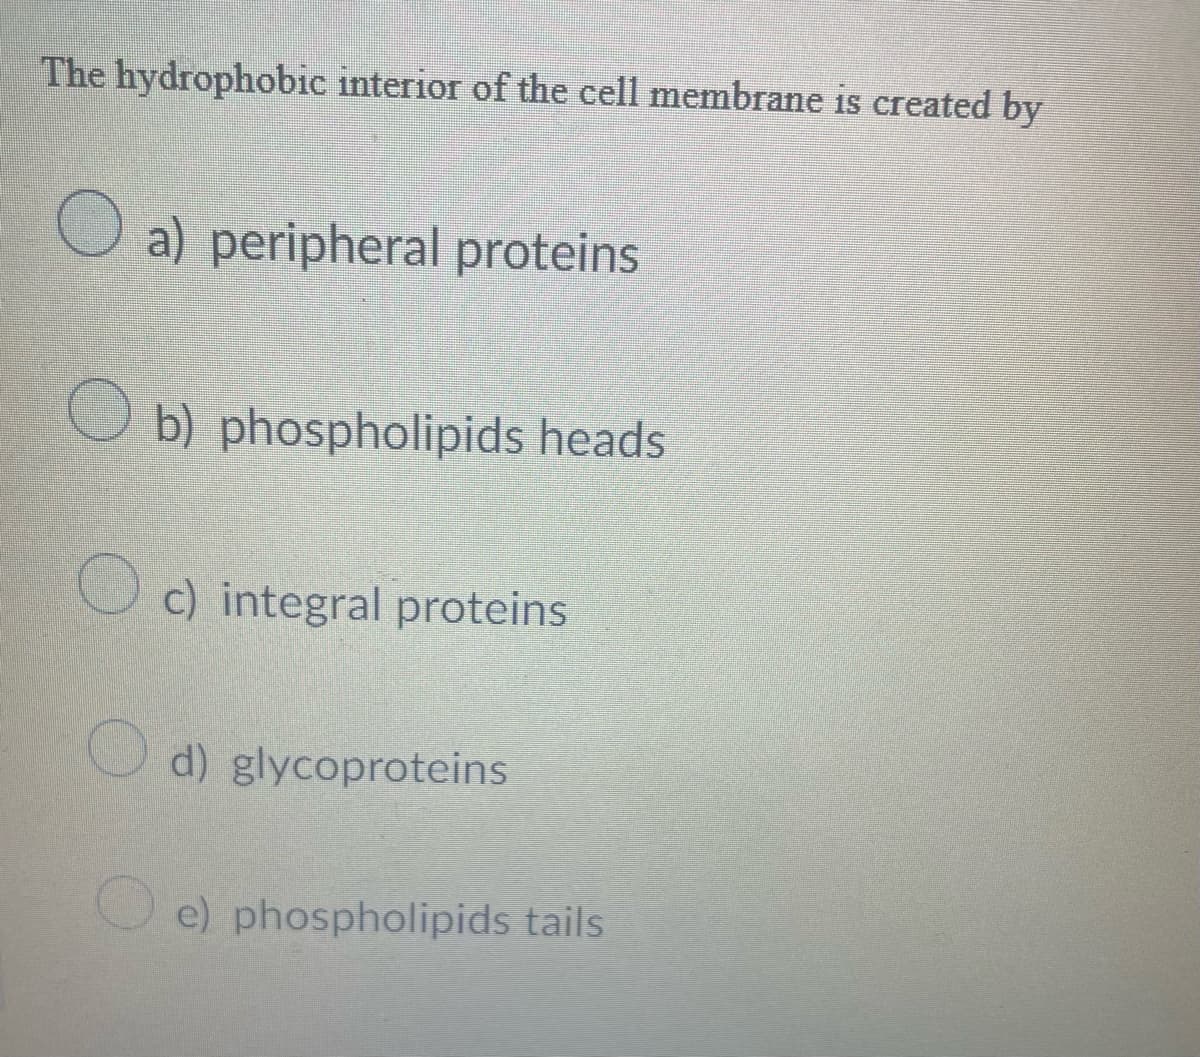 The hydrophobic interior of the cell membrane is created by
O
O
a) peripheral proteins
b) phospholipids heads
c) integral proteins
d) glycoproteins
e) phospholipids tails